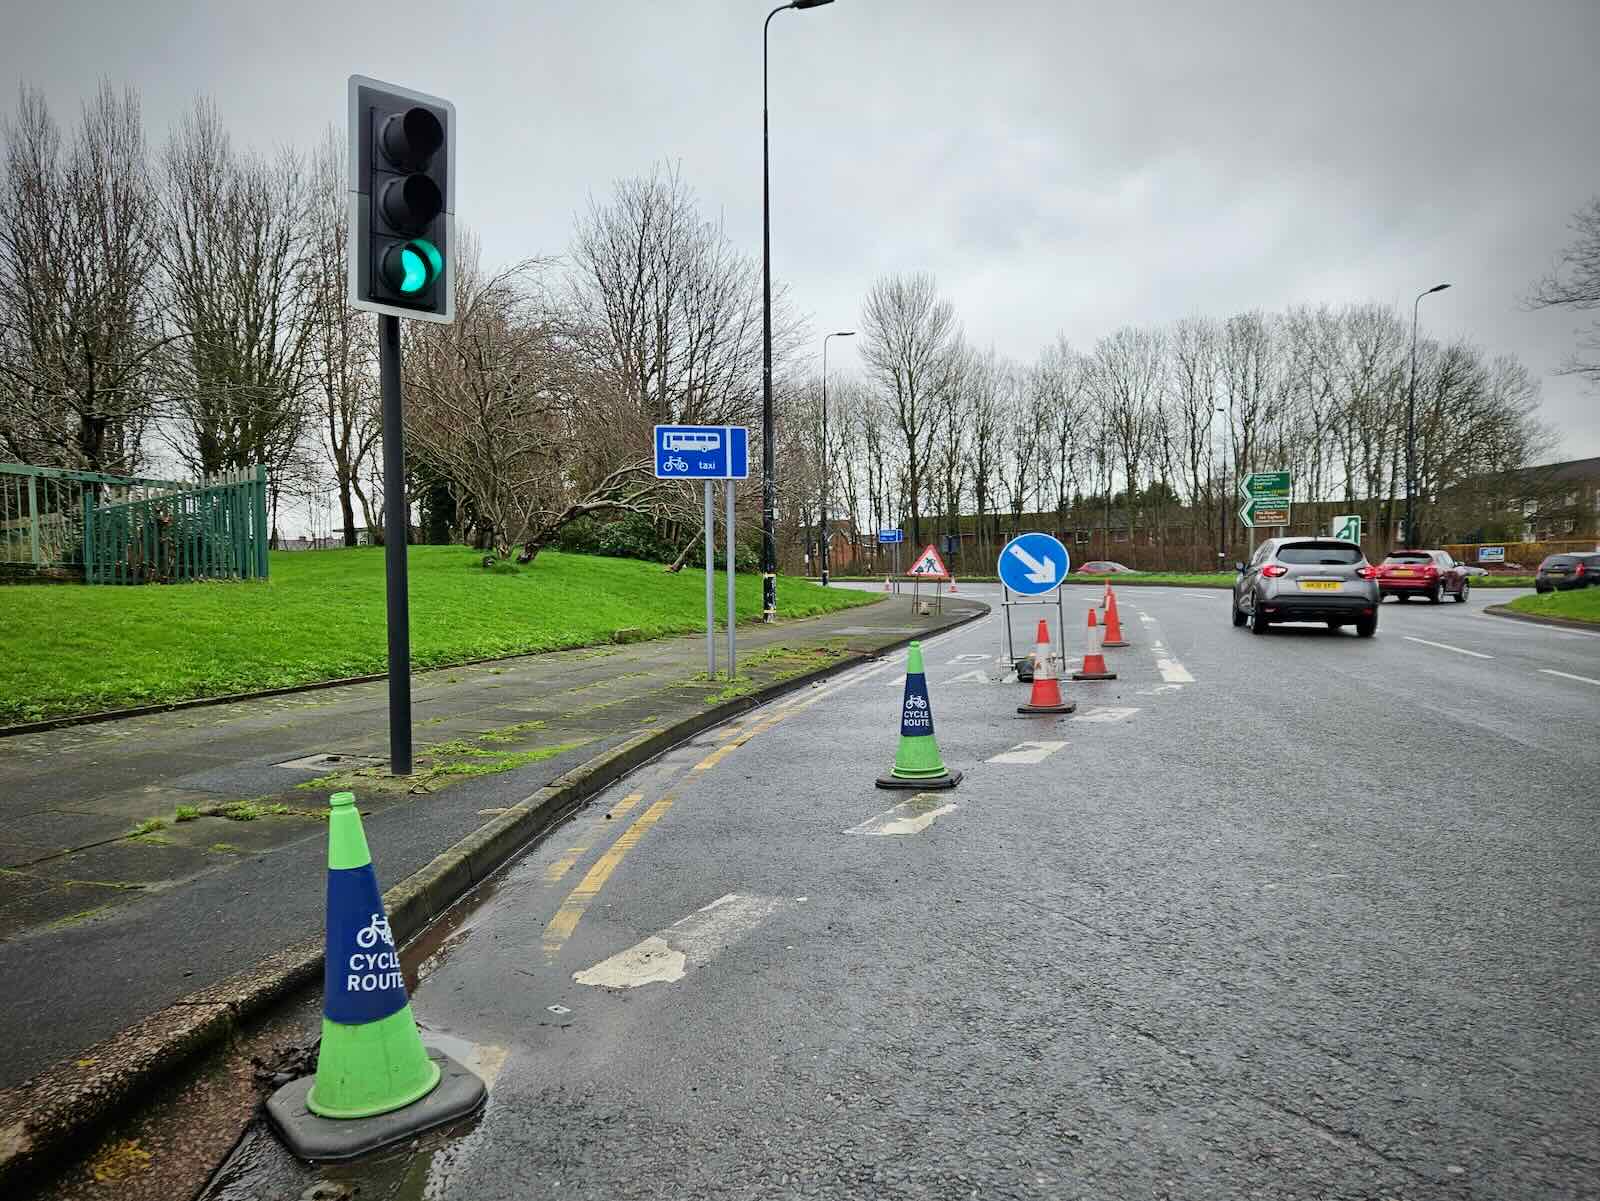 Cones continue at the gyratory